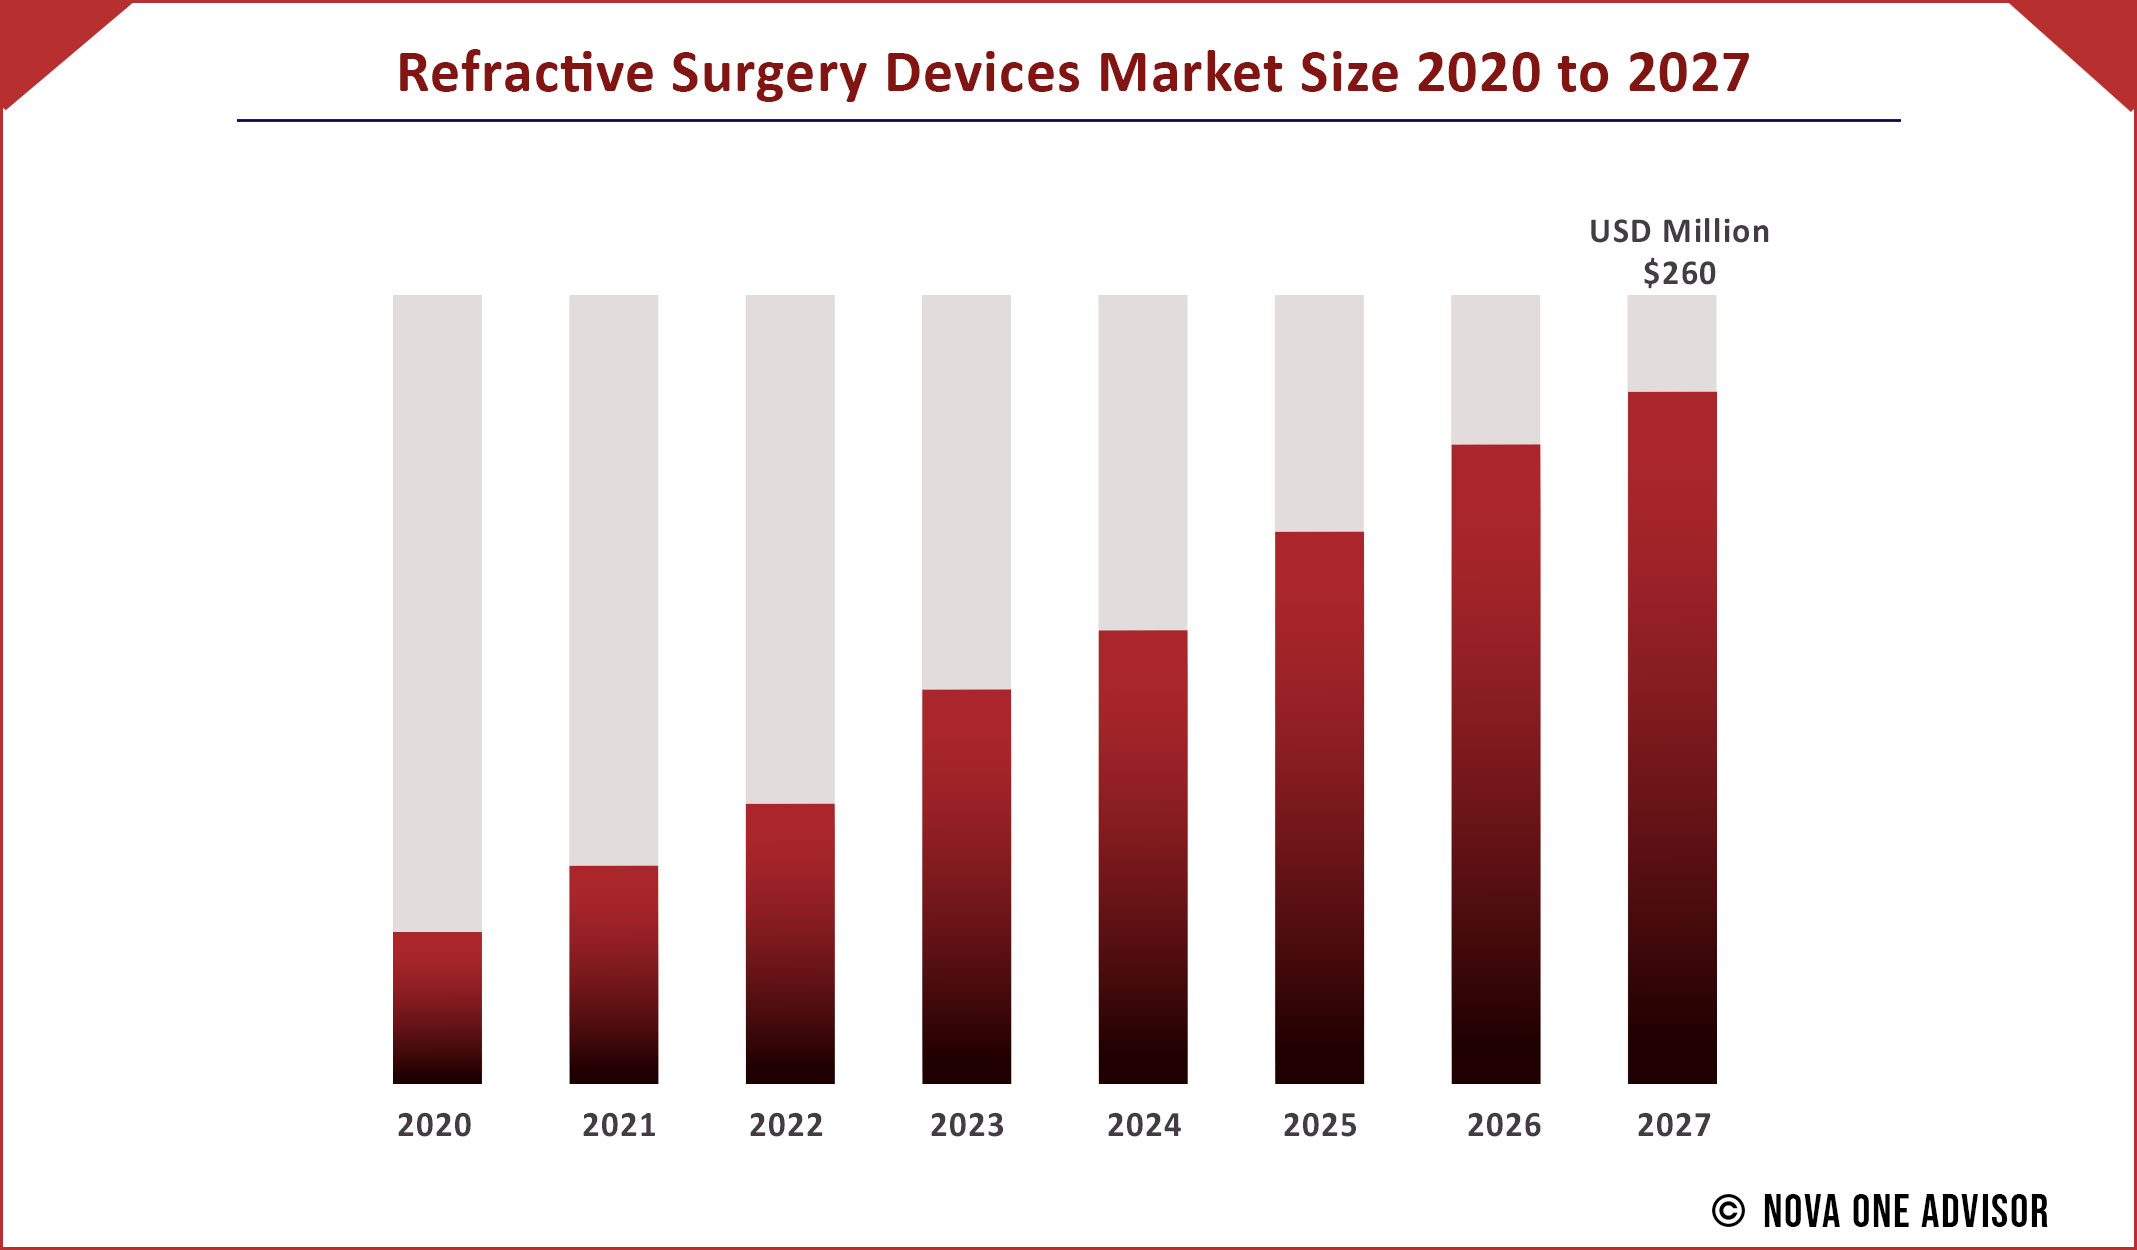 Refractive Surgery Devices Market Size 2020 to 2027